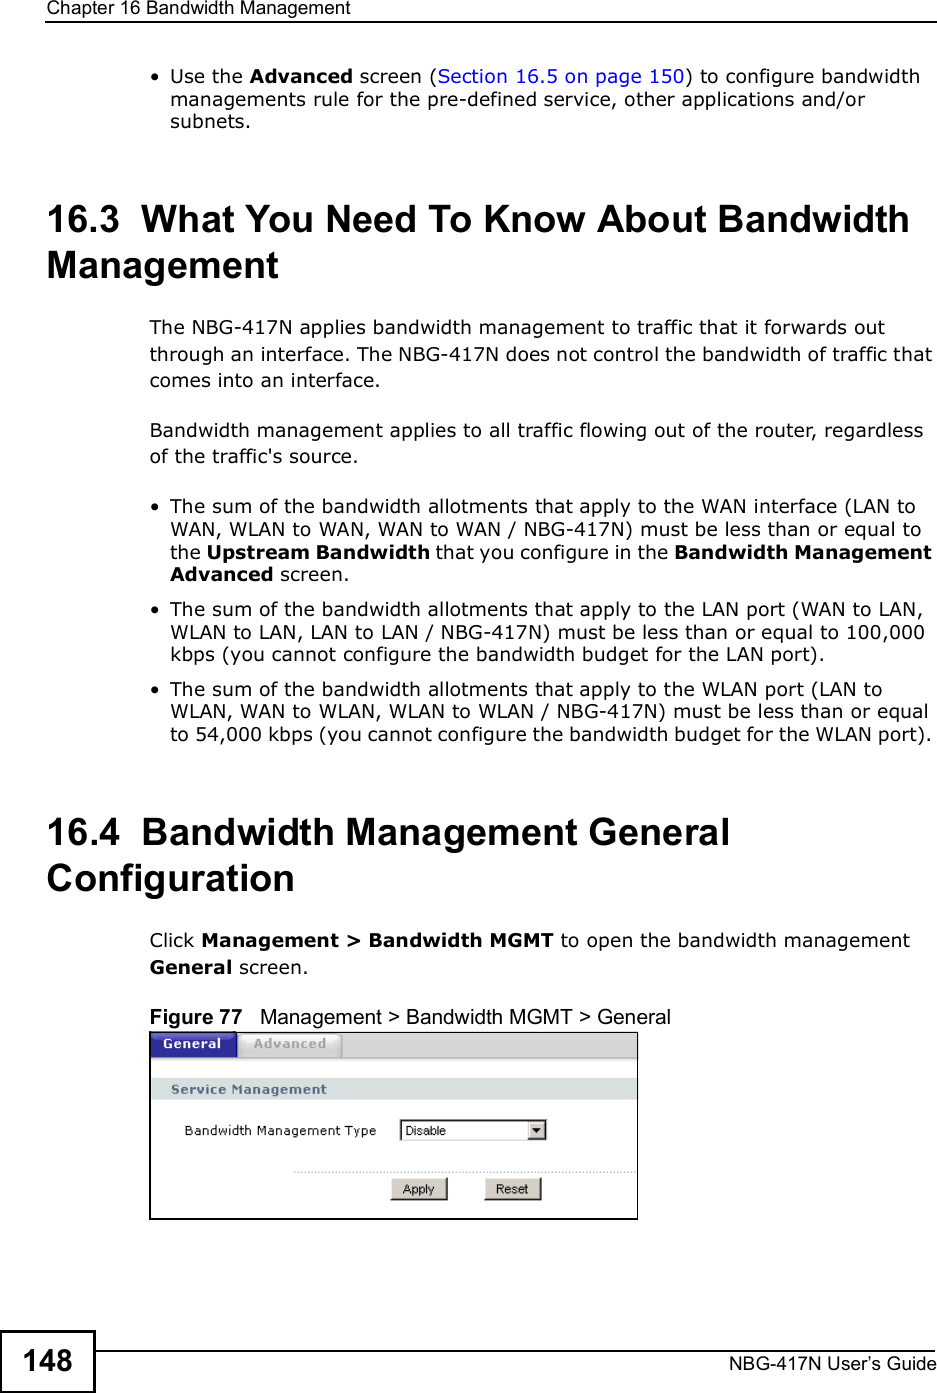 Chapter 16Bandwidth ManagementNBG-417N User s Guide148 Use the Advanced screen (Section 16.5 on page 150) to configure bandwidth managements rule for the pre-defined service, other applications and/or subnets.16.3  What You Need To Know About Bandwidth ManagementThe NBG-417N applies bandwidth management to traffic that it forwards out through an interface. The NBG-417N does not control the bandwidth of traffic that comes into an interface.Bandwidth management applies to all traffic flowing out of the router, regardless of the traffic&apos;s source. The sum of the bandwidth allotments that apply to the WAN interface (LAN to WAN, WLAN to WAN, WAN to WAN / NBG-417N) must be less than or equal to the Upstream Bandwidth that you configure in the Bandwidth Management Advanced screen.  The sum of the bandwidth allotments that apply to the LAN port (WAN to LAN, WLAN to LAN, LAN to LAN / NBG-417N) must be less than or equal to 100,000 kbps (you cannot configure the bandwidth budget for the LAN port).  The sum of the bandwidth allotments that apply to the WLAN port (LAN to WLAN, WAN to WLAN, WLAN to WLAN / NBG-417N) must be less than or equal to 54,000 kbps (you cannot configure the bandwidth budget for the WLAN port). 16.4  Bandwidth Management General Configuration Click Management &gt; Bandwidth MGMT to open the bandwidth management General screen.Figure 77   Management &gt; Bandwidth MGMT &gt; General   